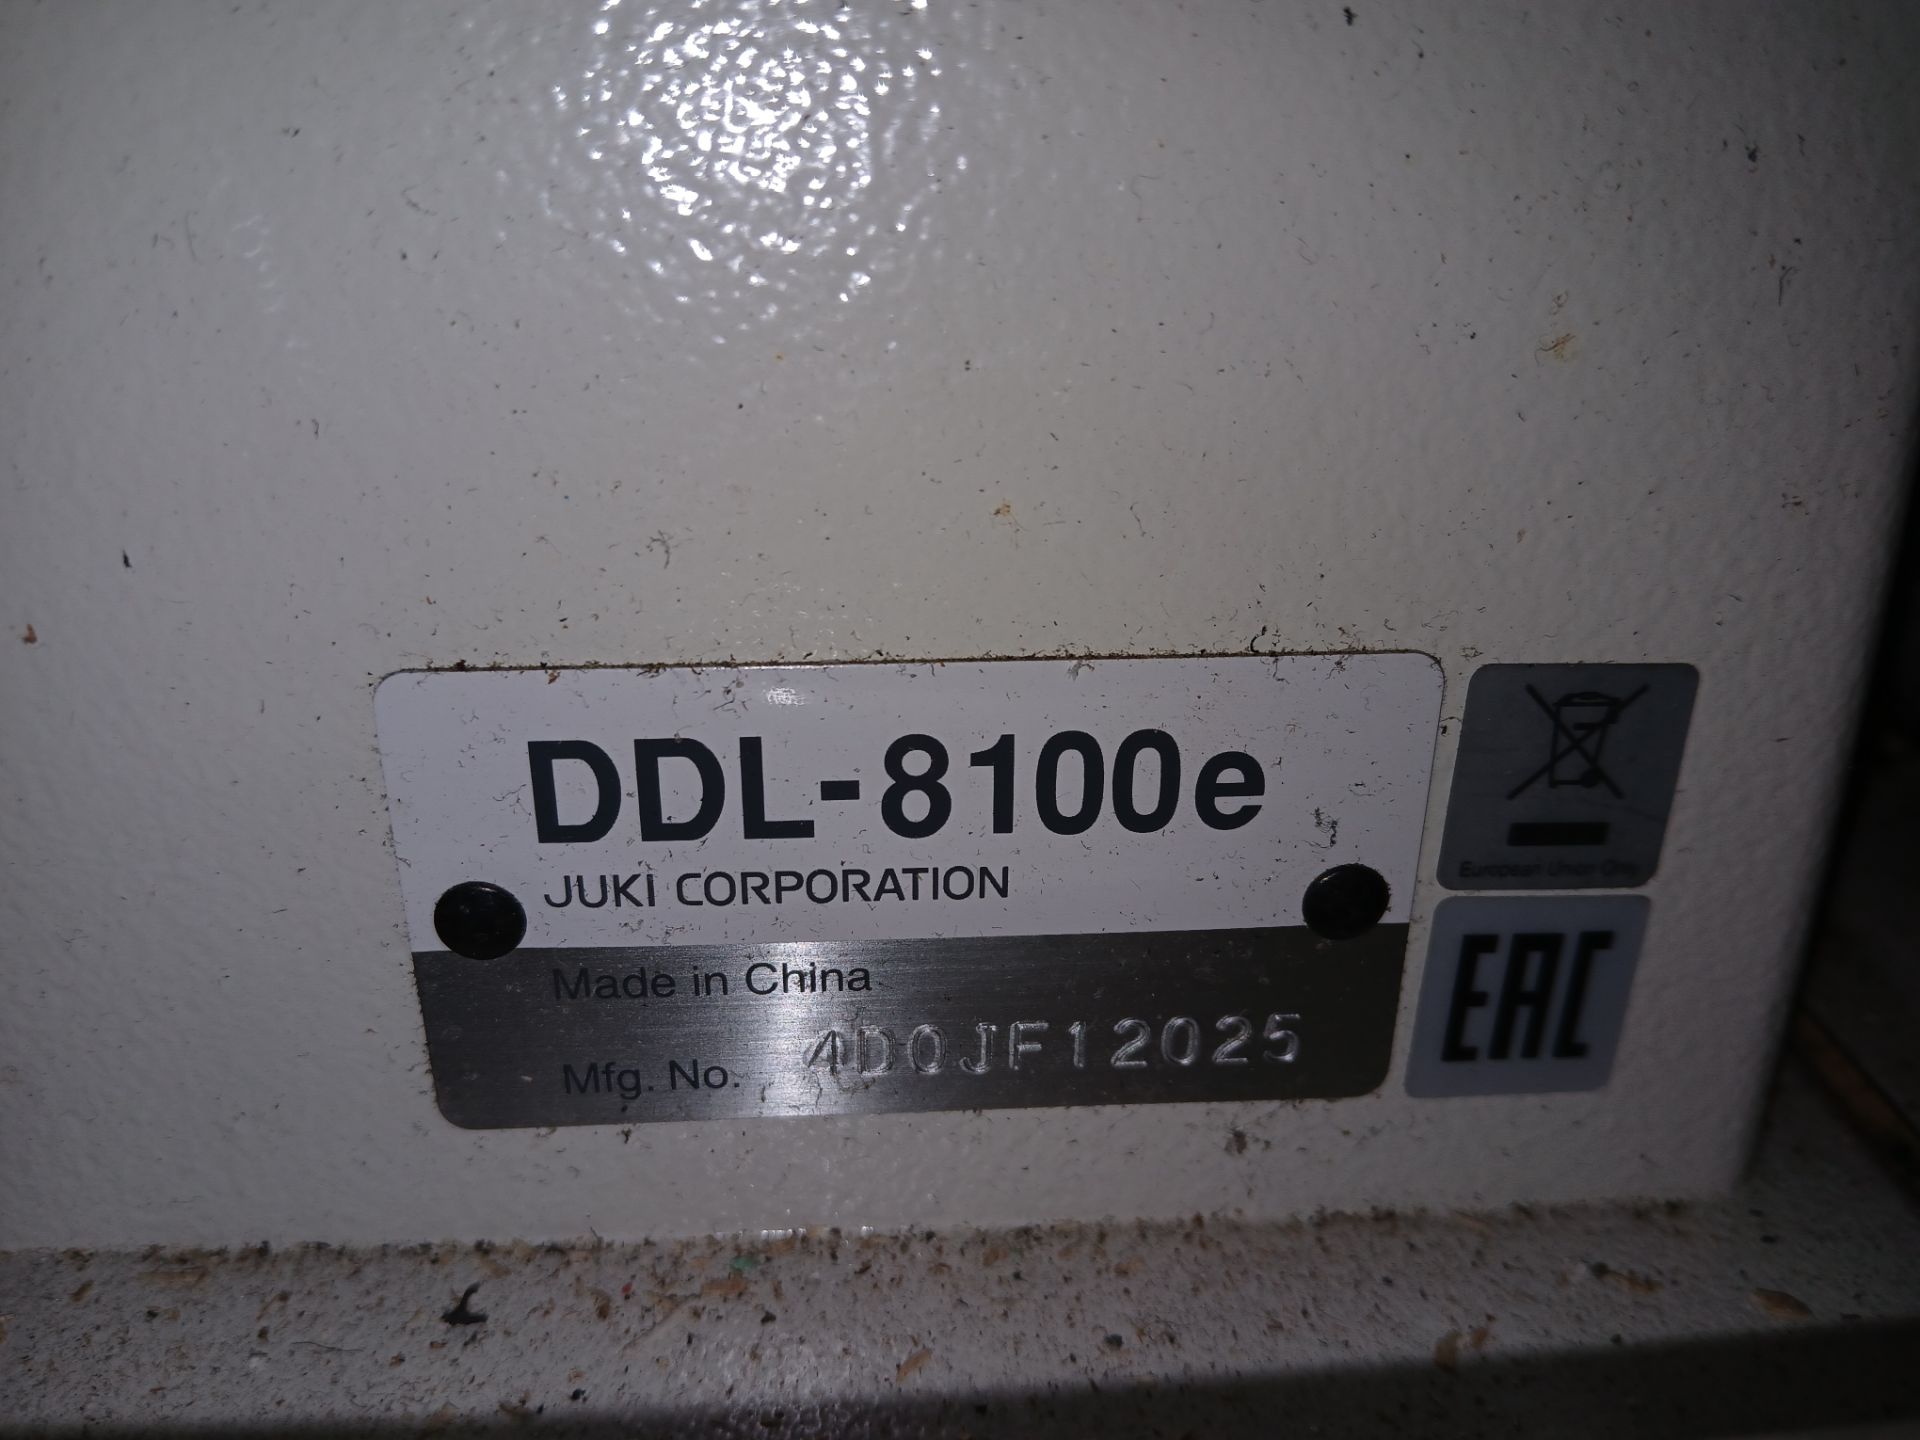 Juki DDL 800e sewing machine as lotted – not in use but understood to be in working order. Viewing - Image 3 of 4